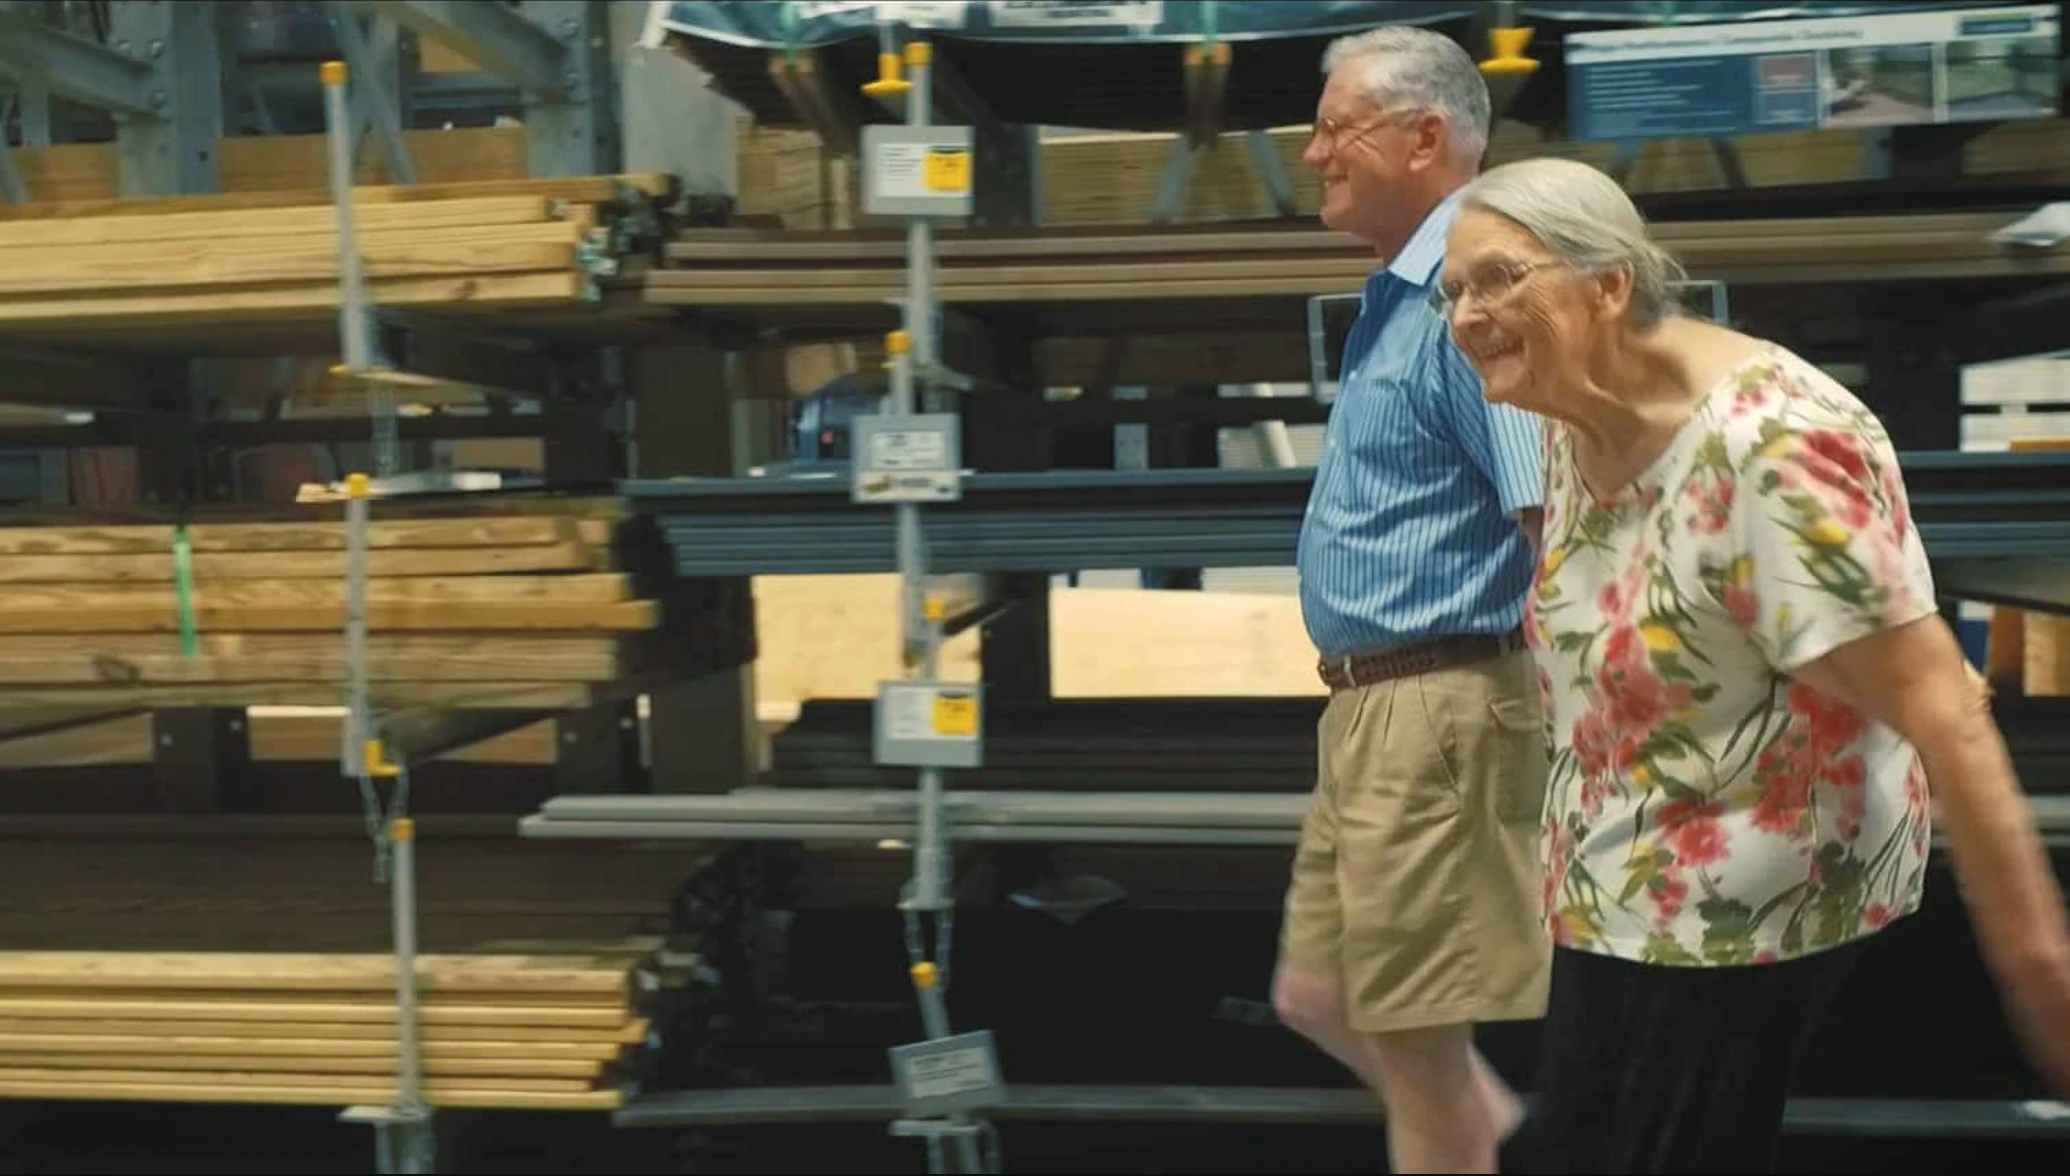 Senior citizens in the lumber aisle at Lowe's